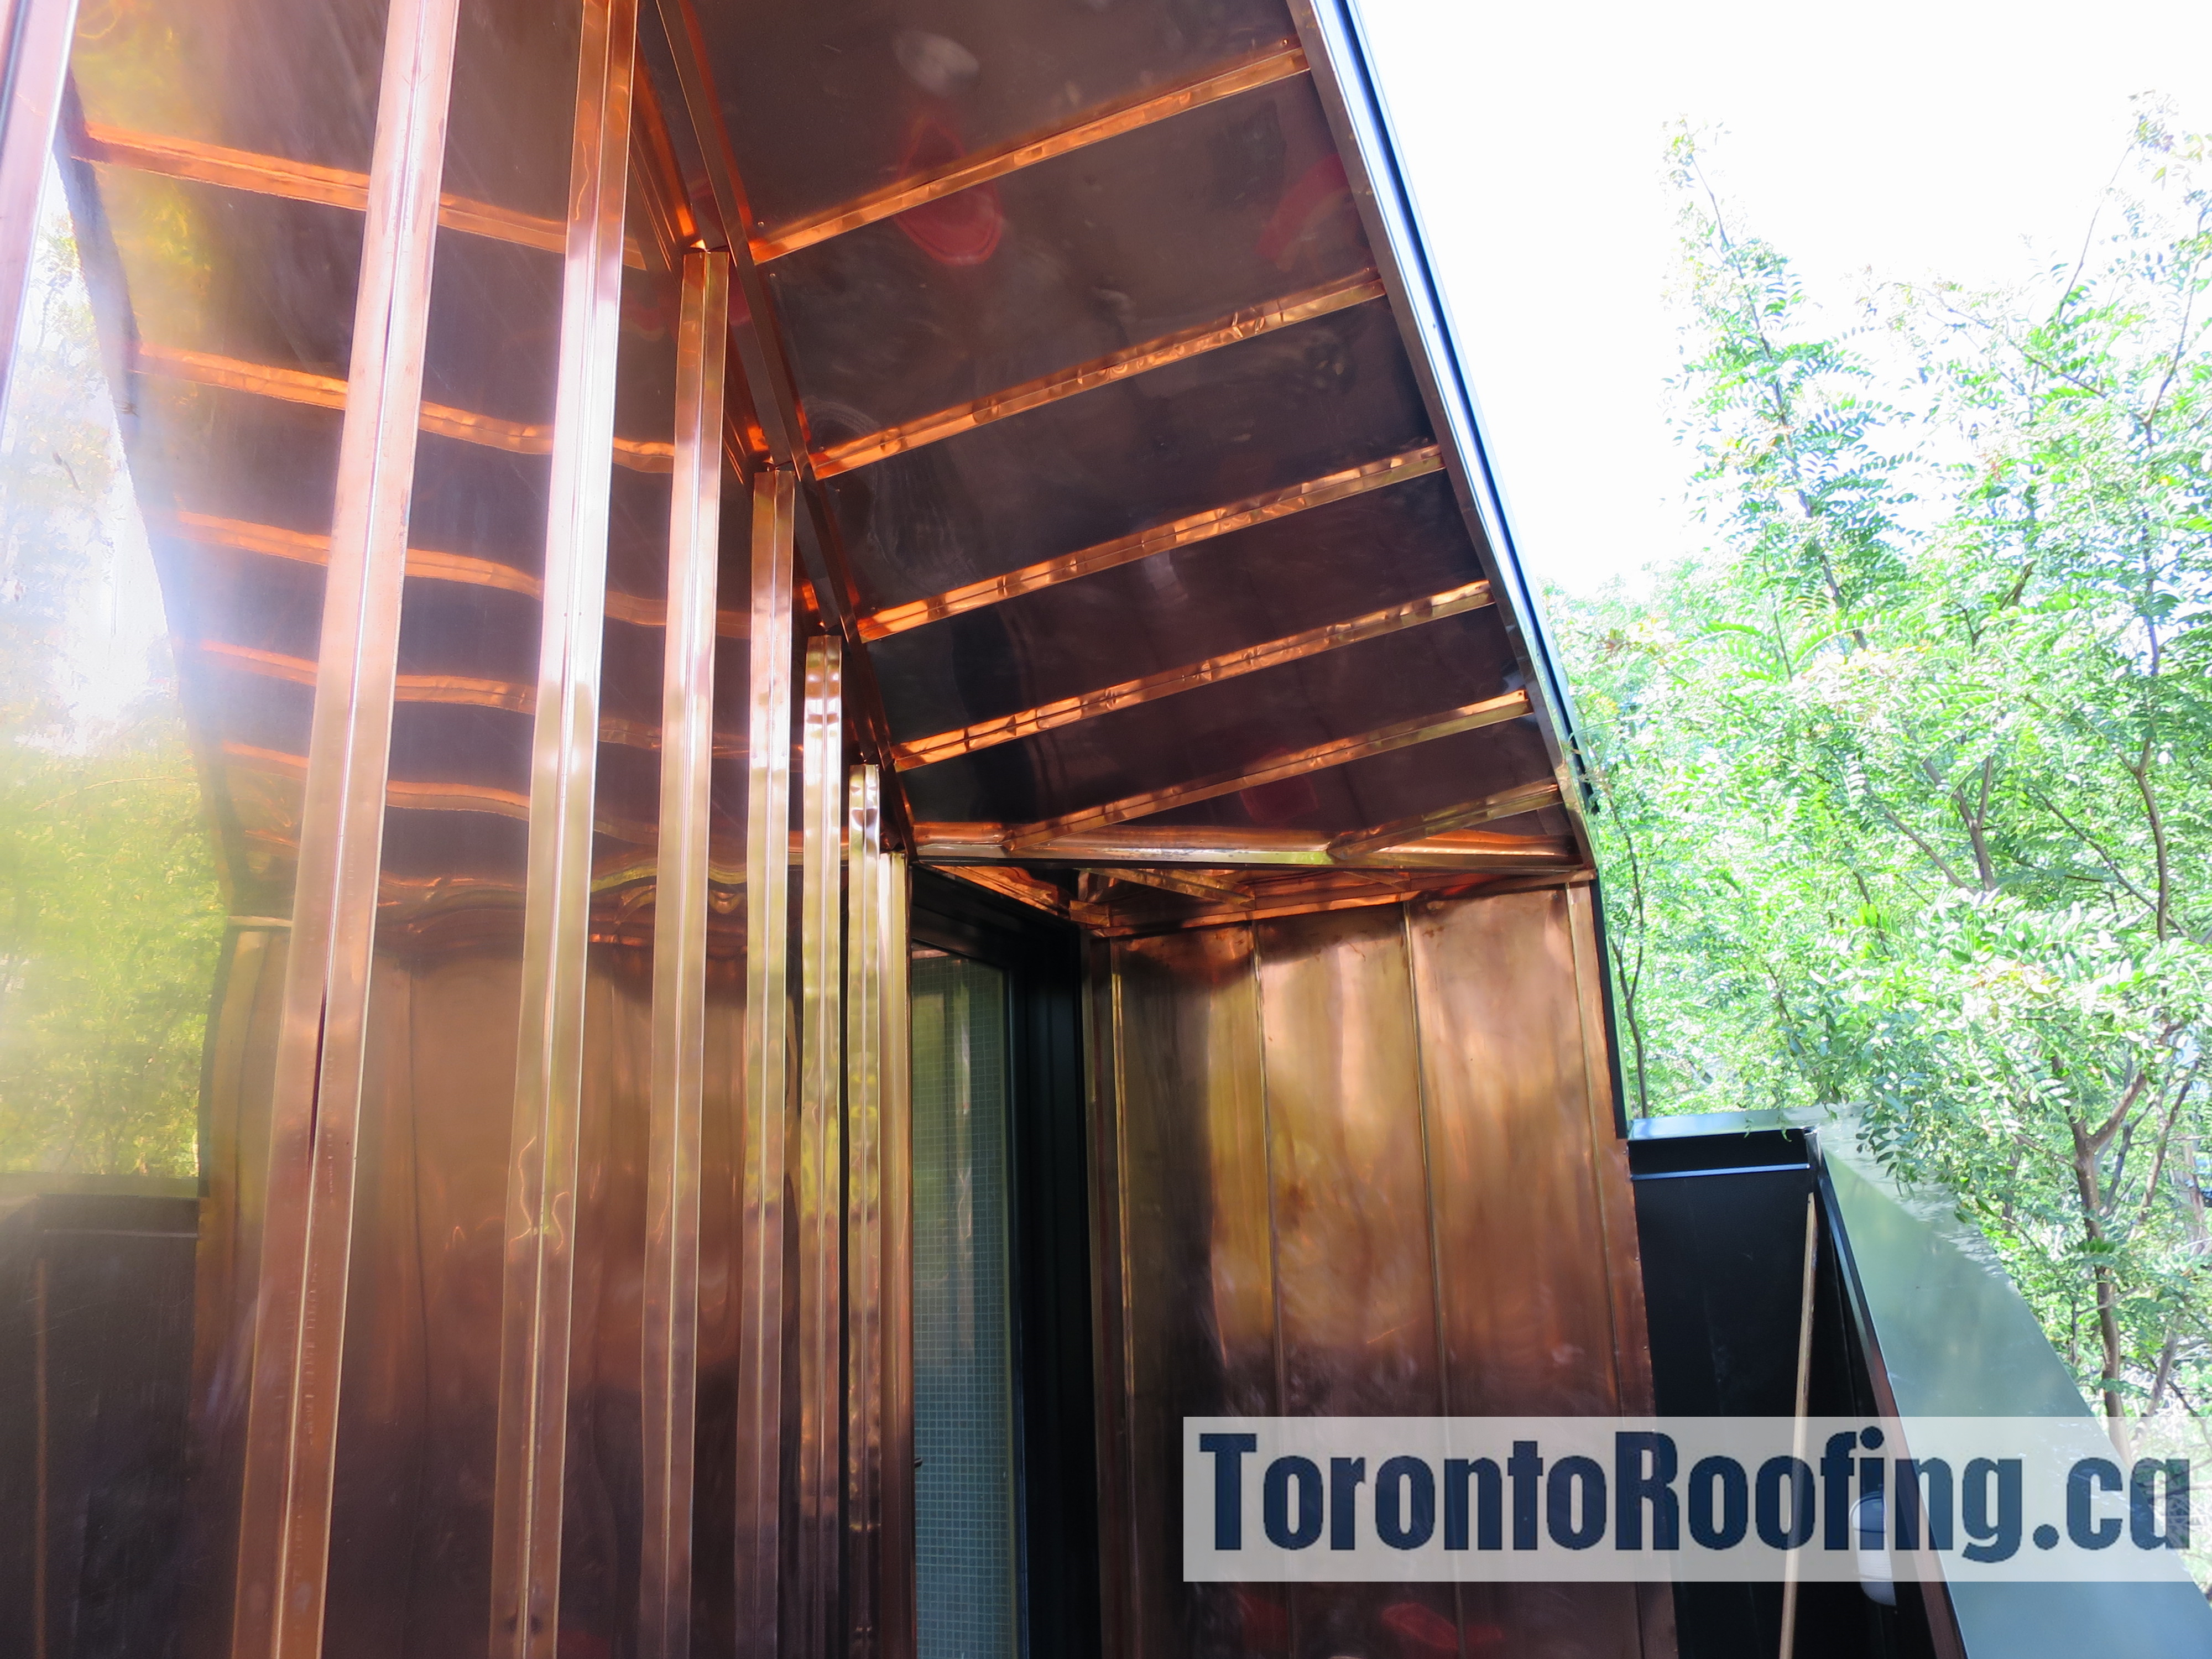 toronto-roofing-roof-siding-metal-copper-wood-modern-homes-aluminum-cladding-architeture-building-contractor-exterior-17